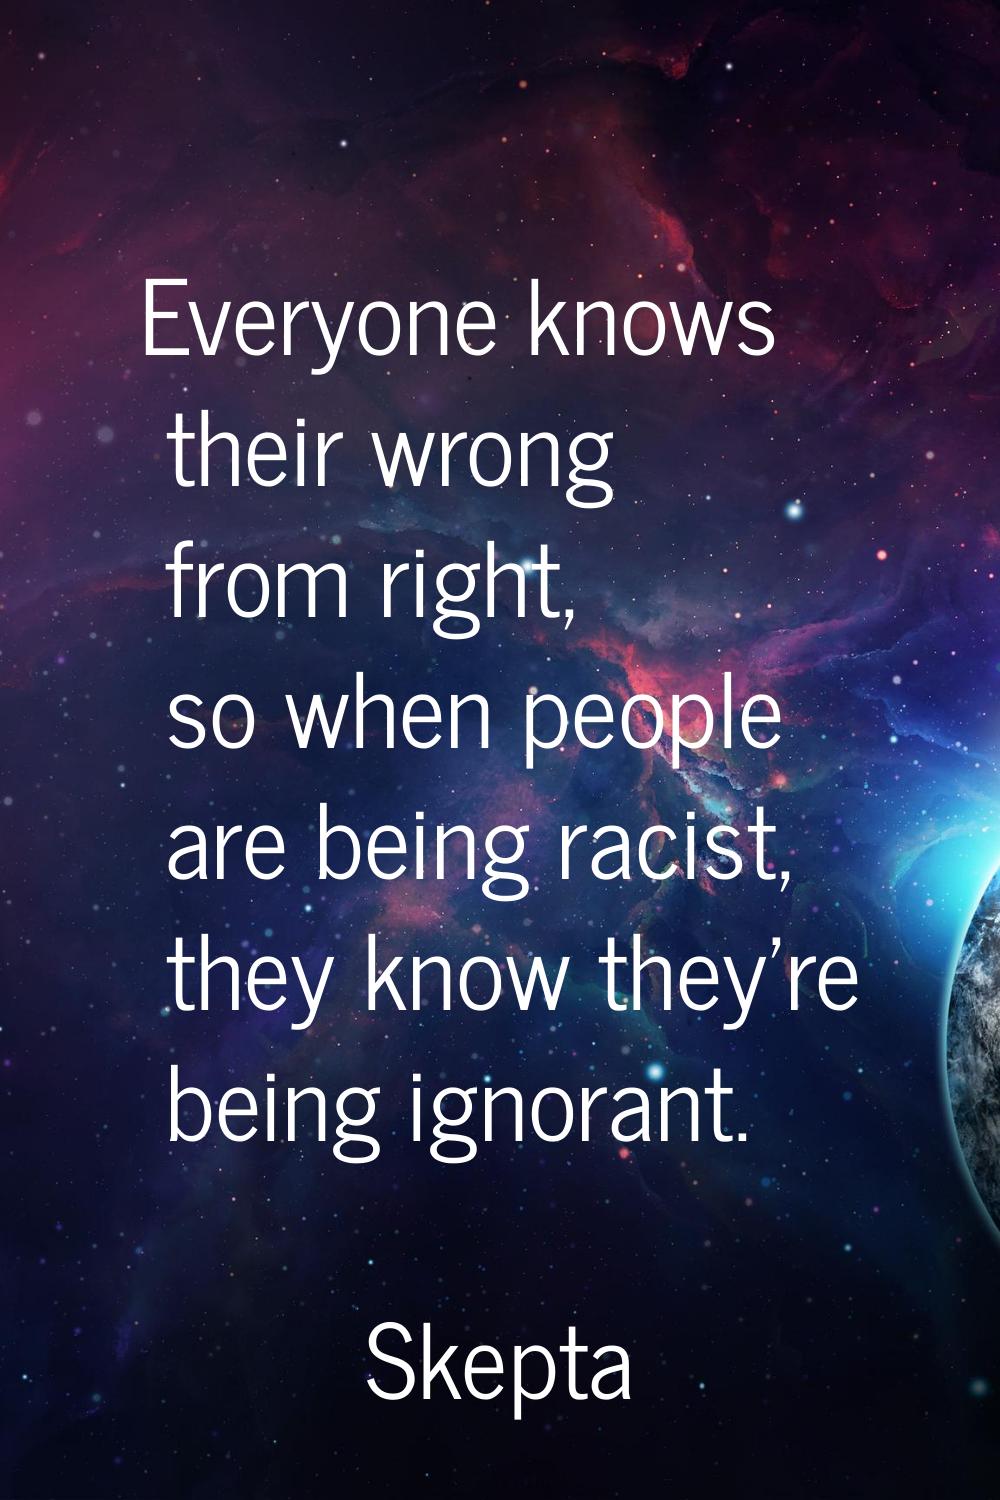 Everyone knows their wrong from right, so when people are being racist, they know they're being ign